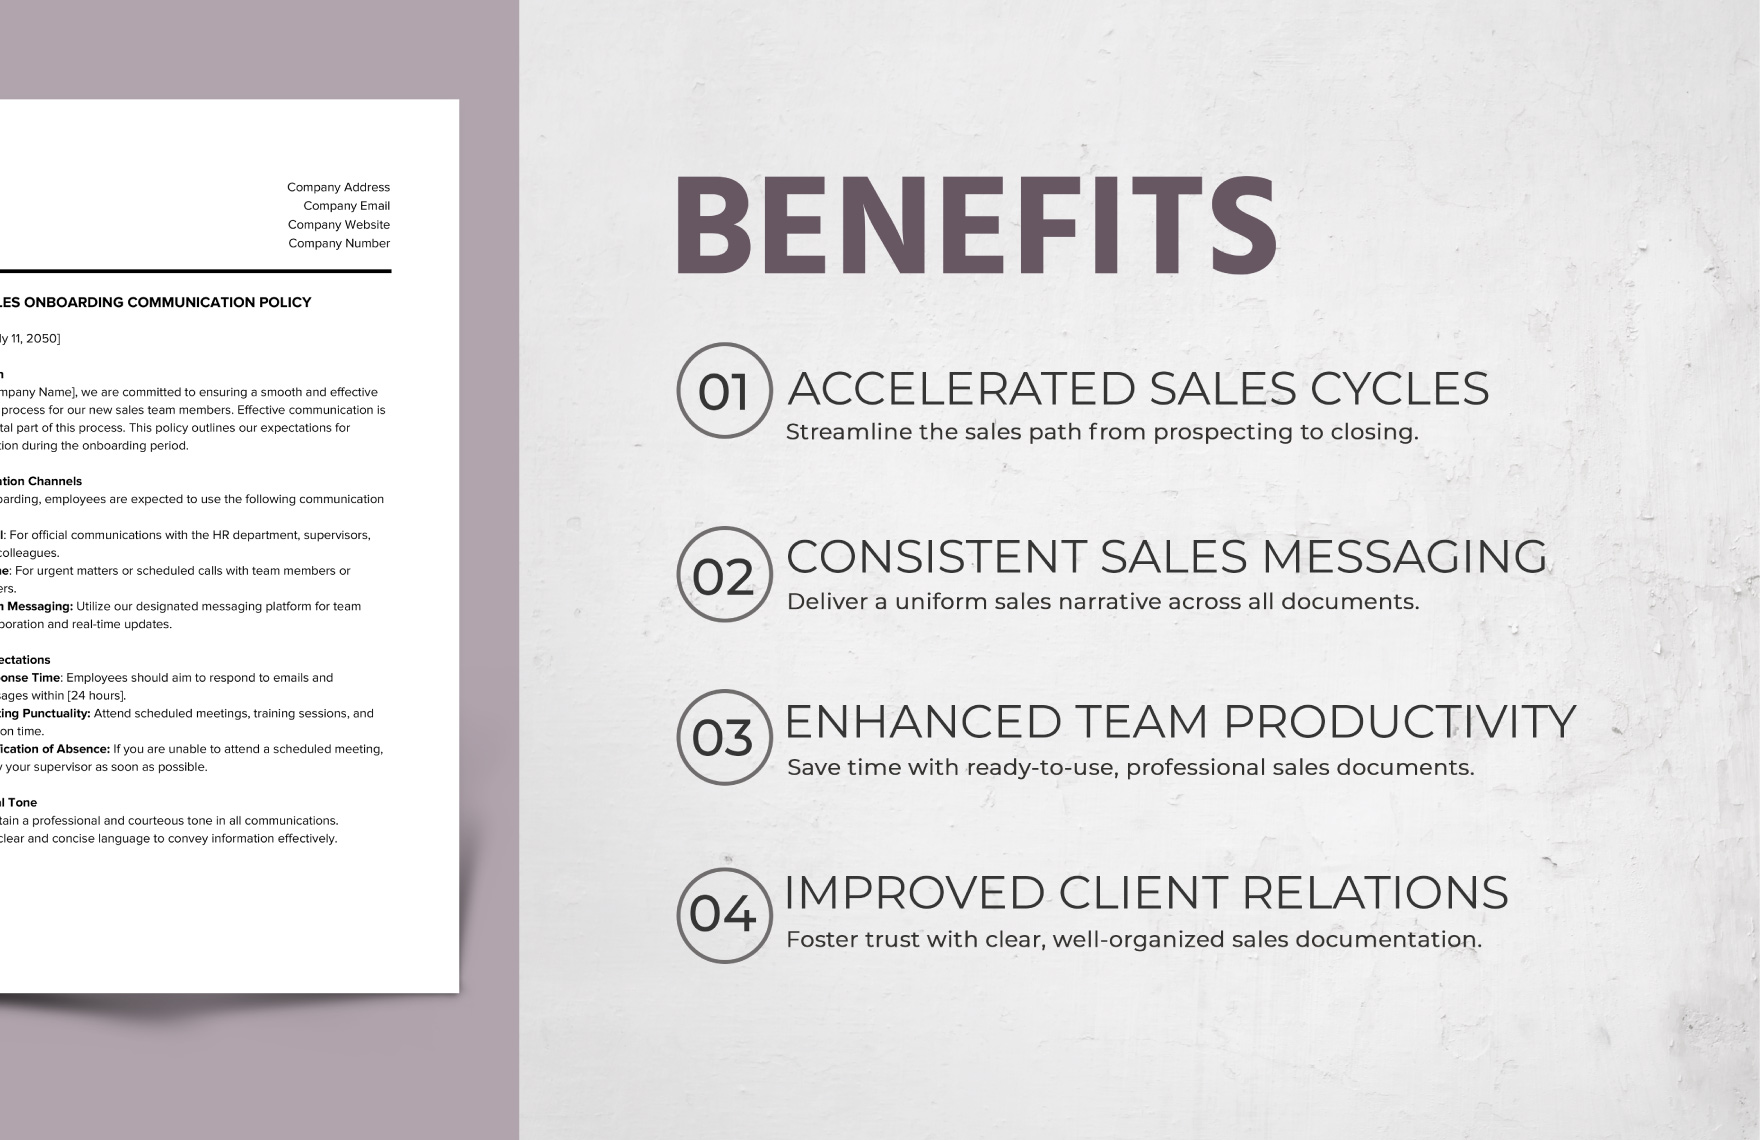 Sales Onboarding Communication Policy Template